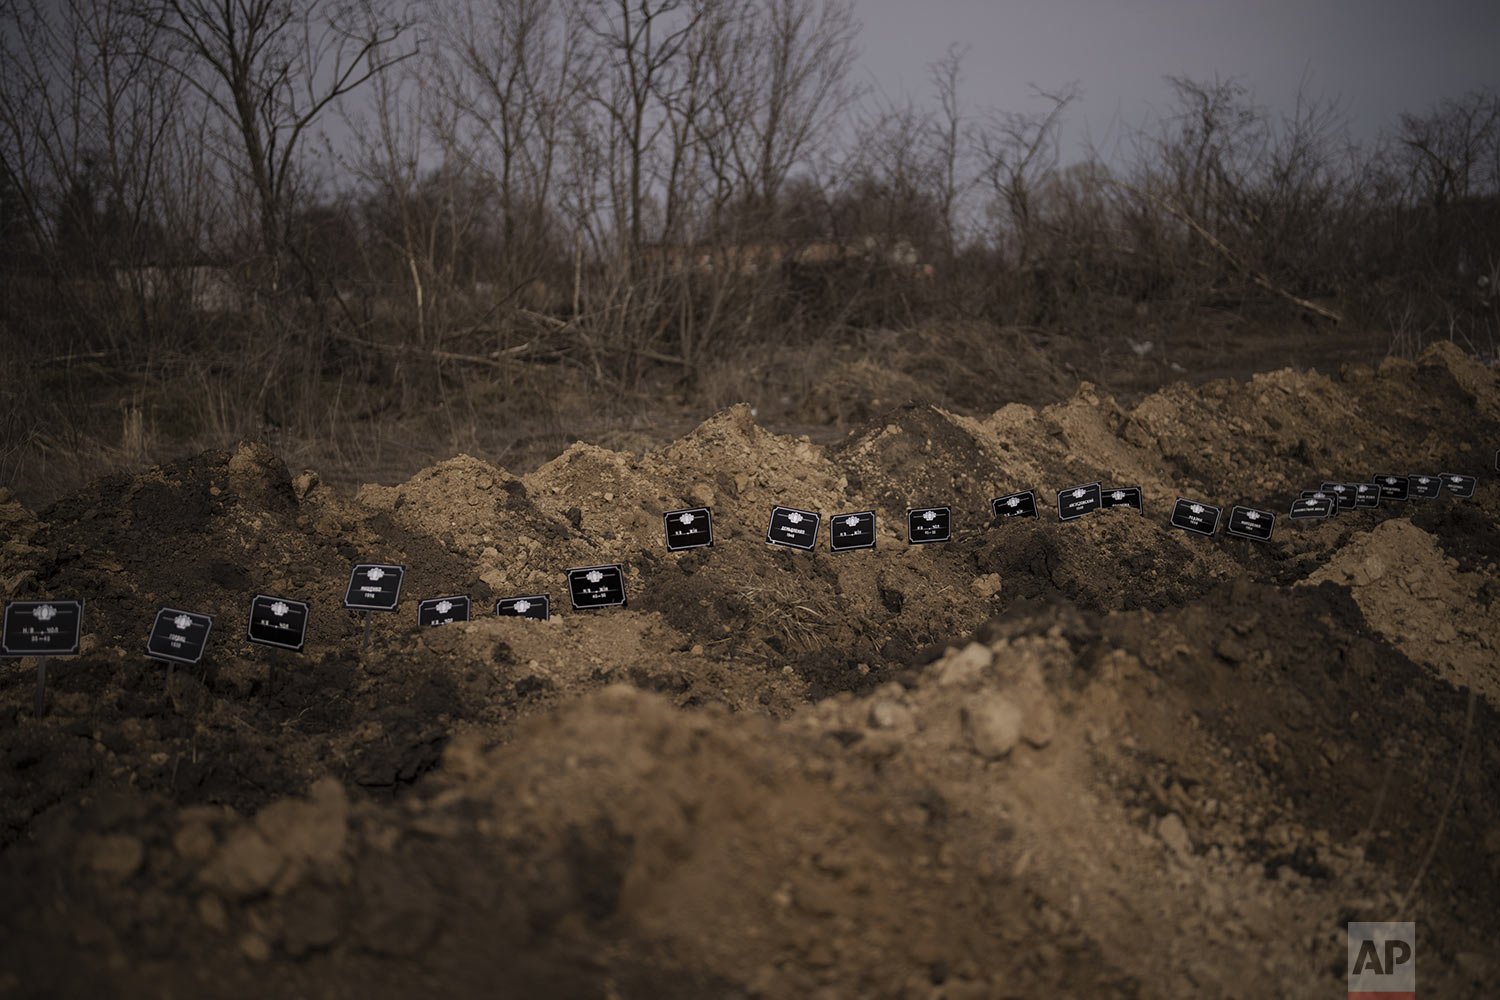  Personalized grave markers line a mass grave at a cemetery in Kharkiv, Ukraine, Saturday, March 26, 2022. According to workers, most of them died of natural causes and were buried in the mass grave after no relatives claimed the bodies. (AP Photo/Fe